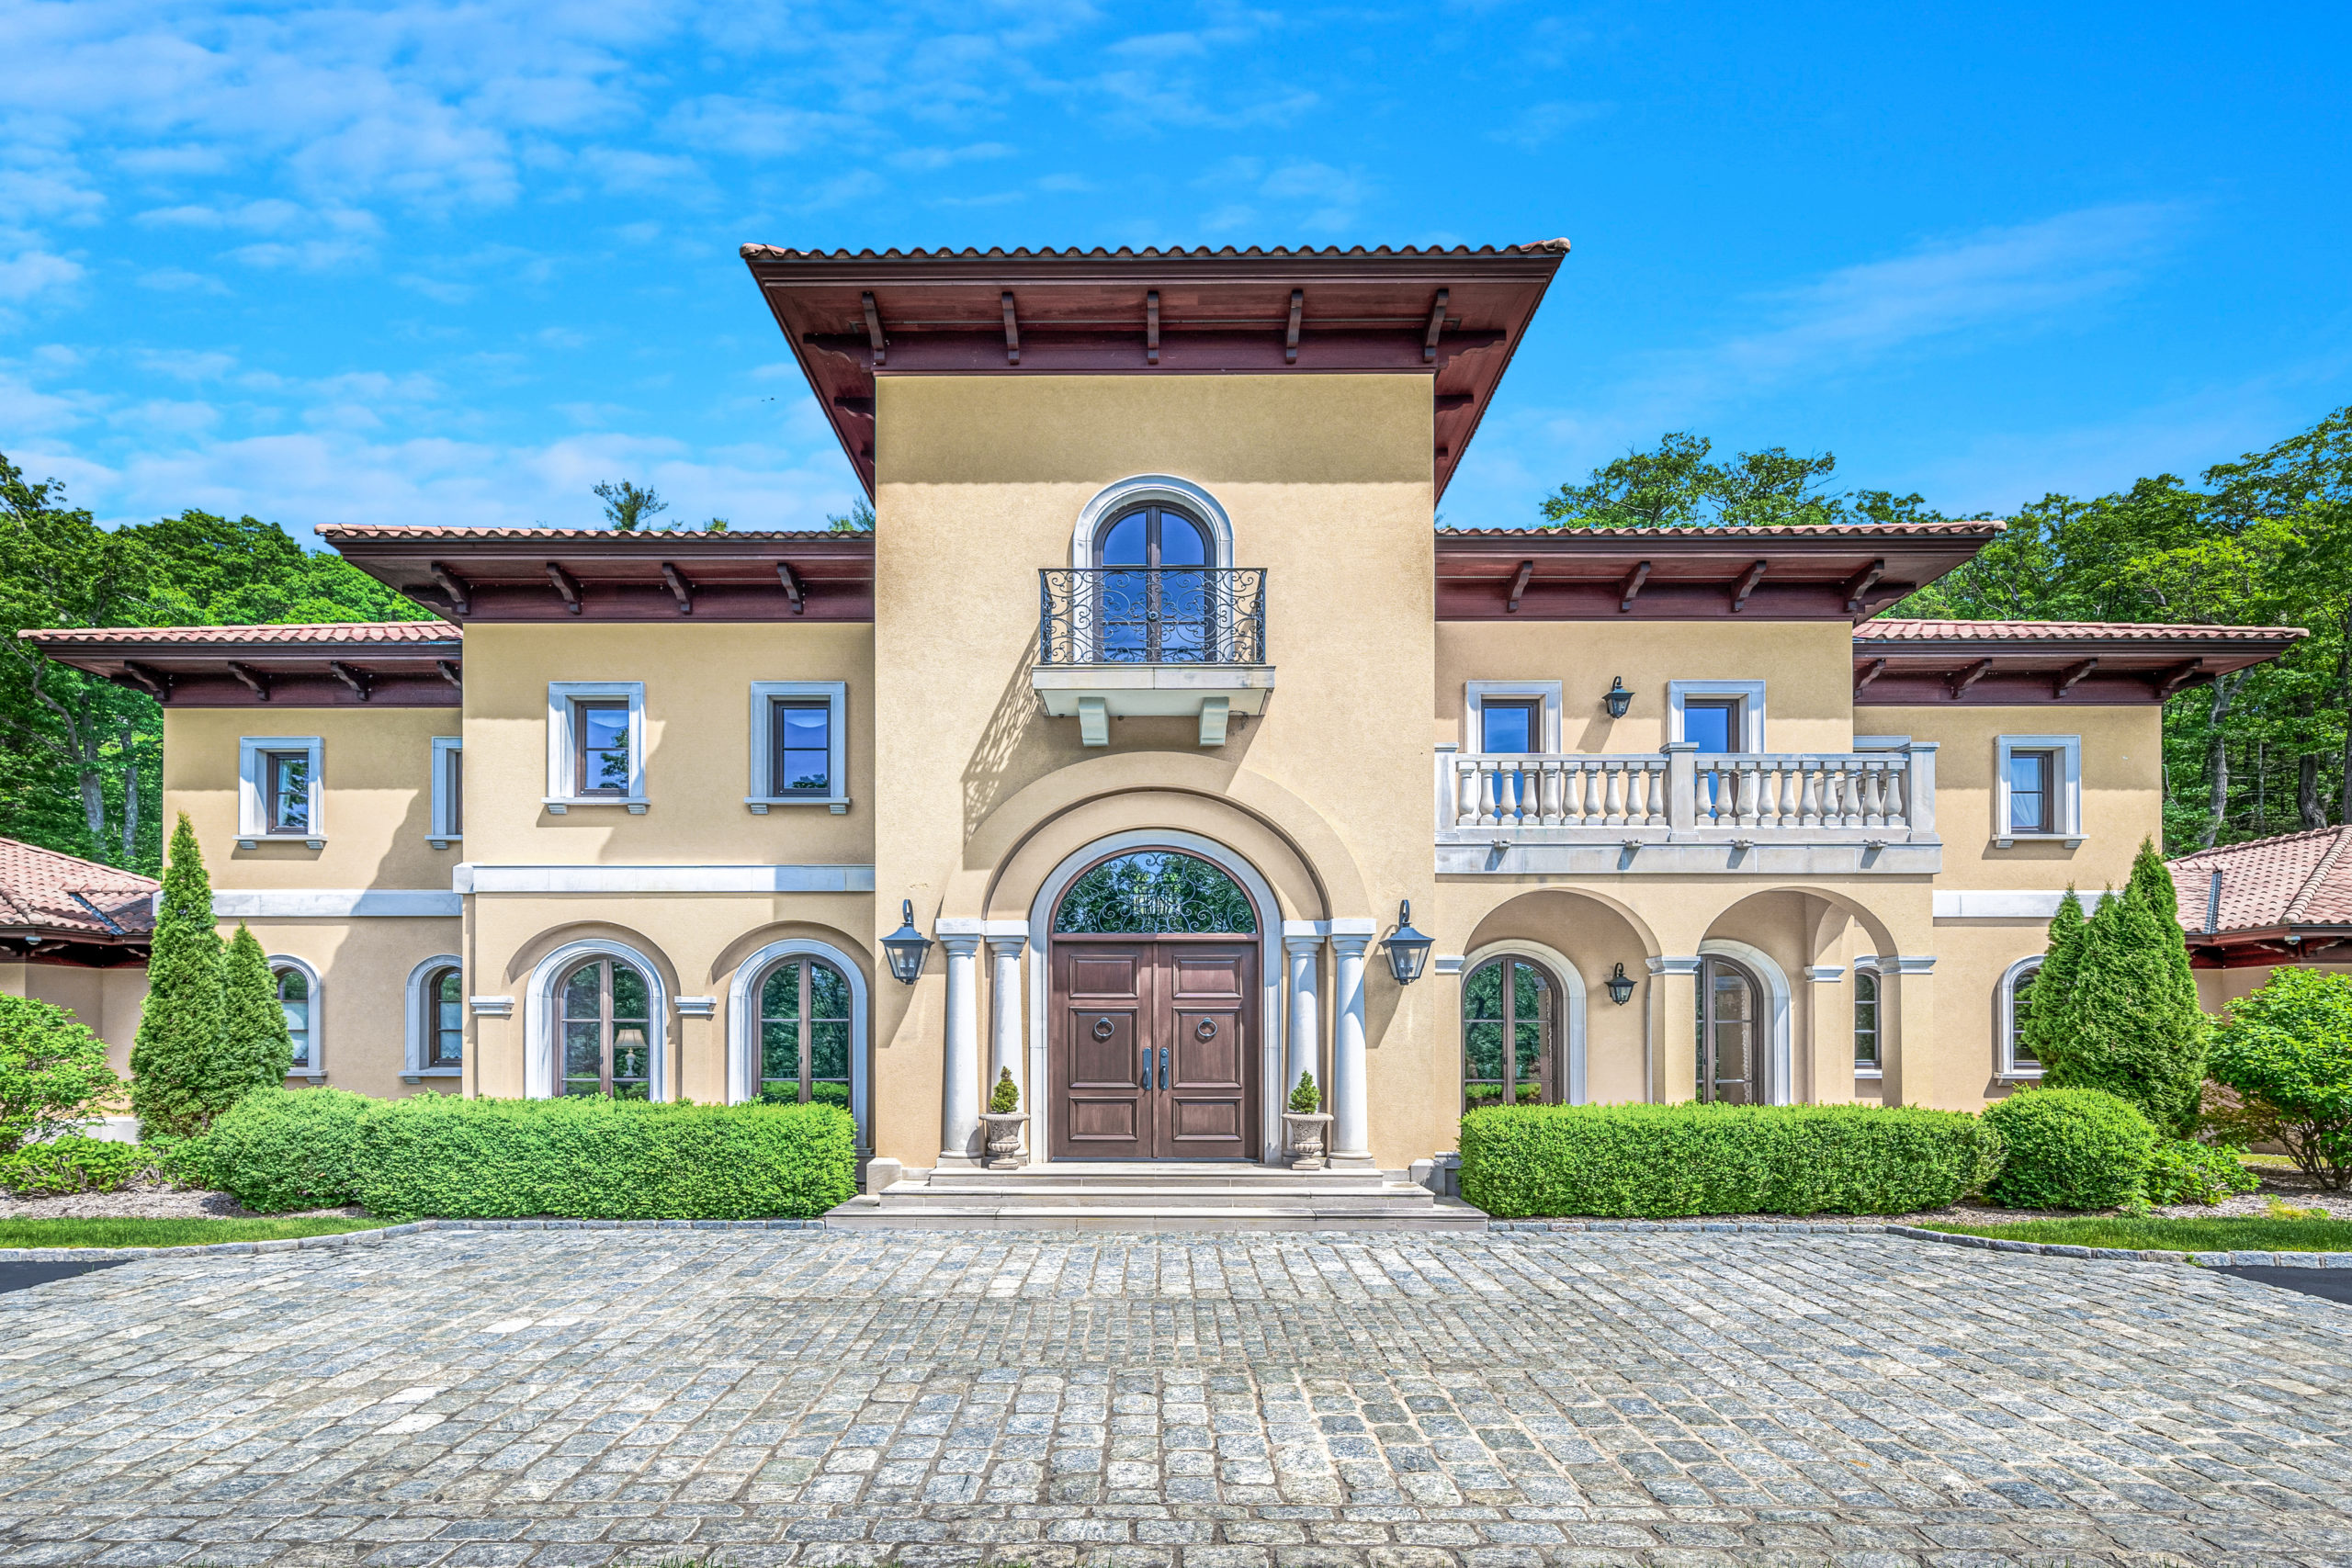 Hudson Valley Real Estate Watch: Douglas Elliman Expands Its Footprint North of New York City